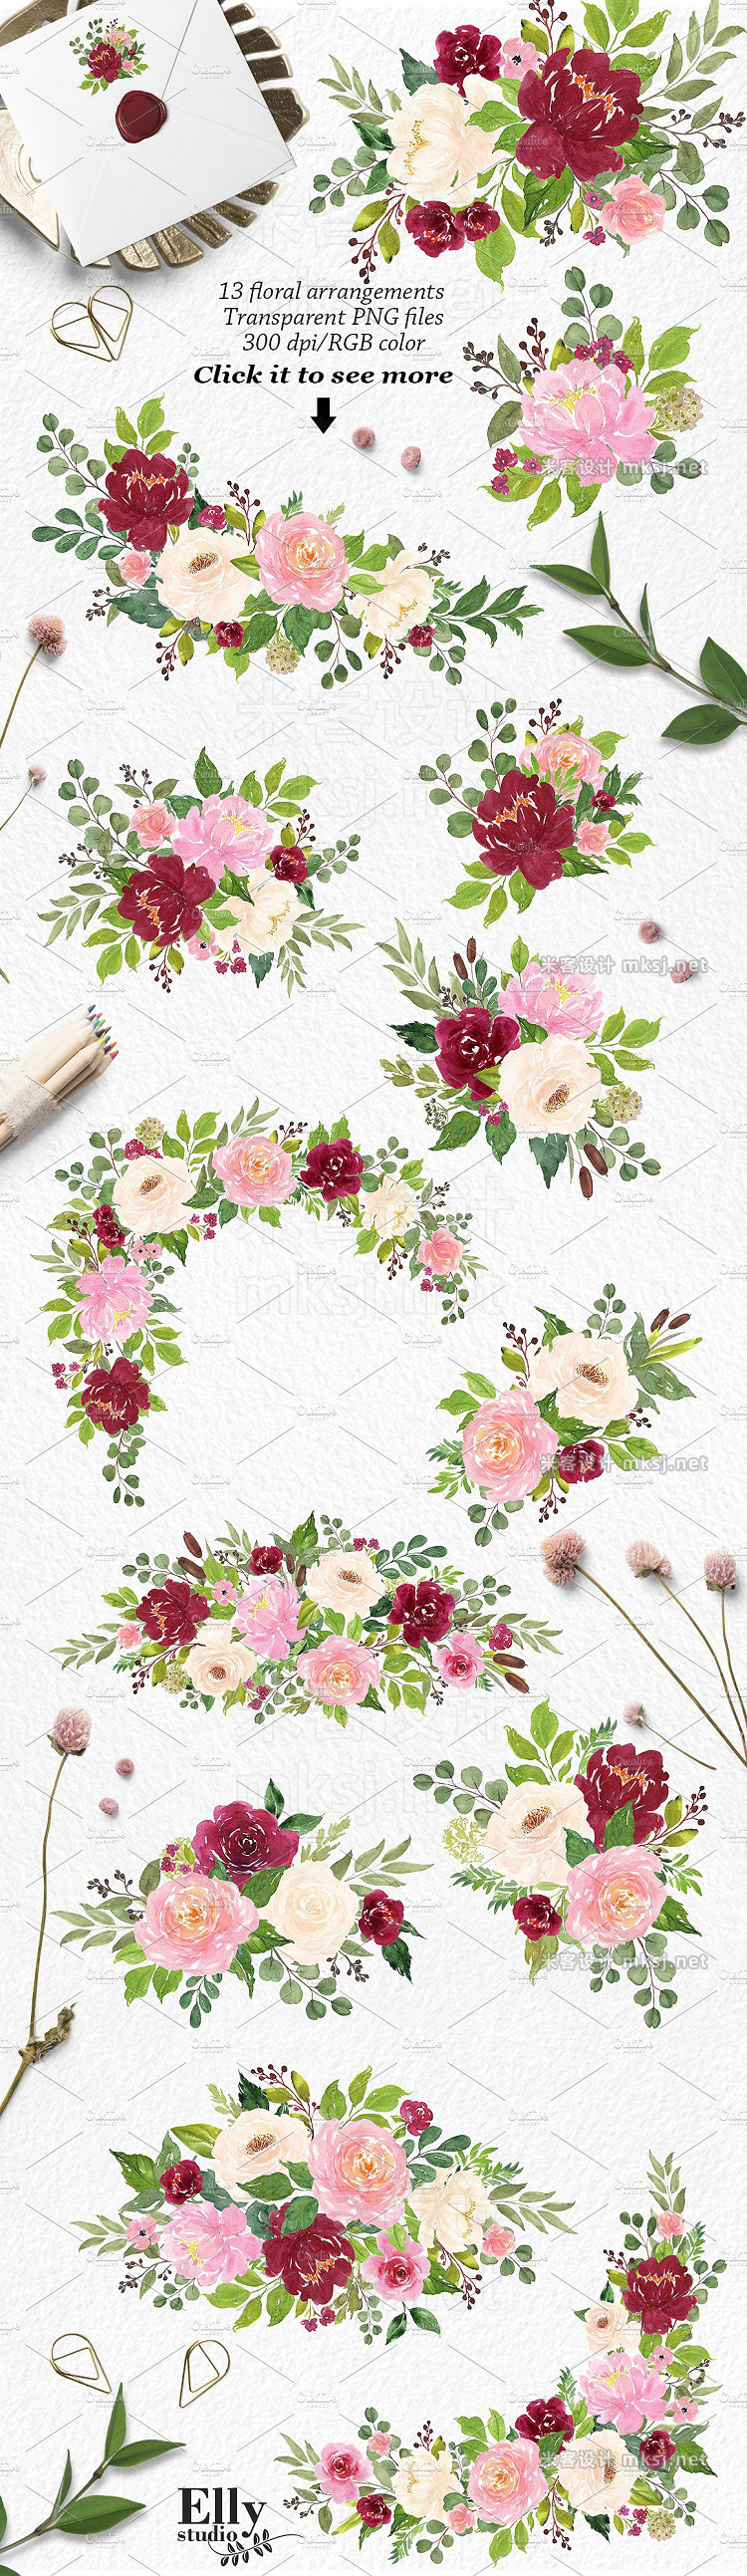 png素材 Watercolor Flower Graphic Set